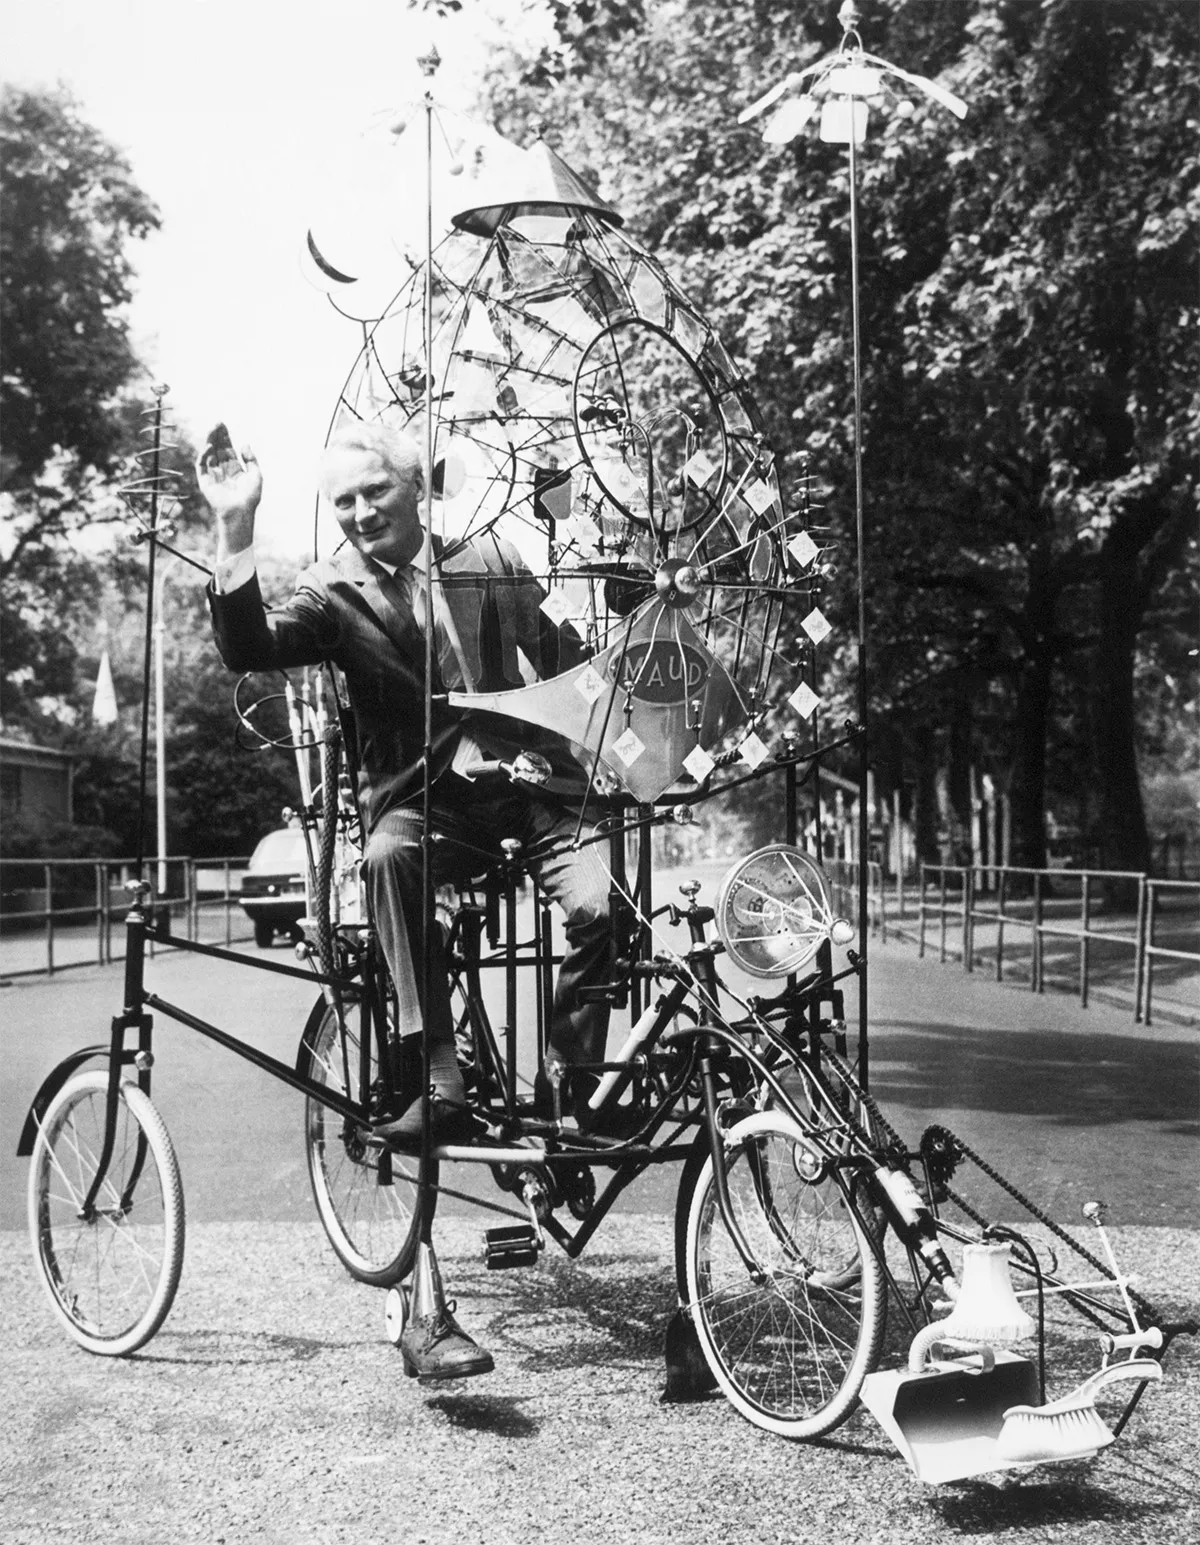 Inventor Rowland Emett and his 'lunacycle' invention. Credit: Bettmann/Getty Images